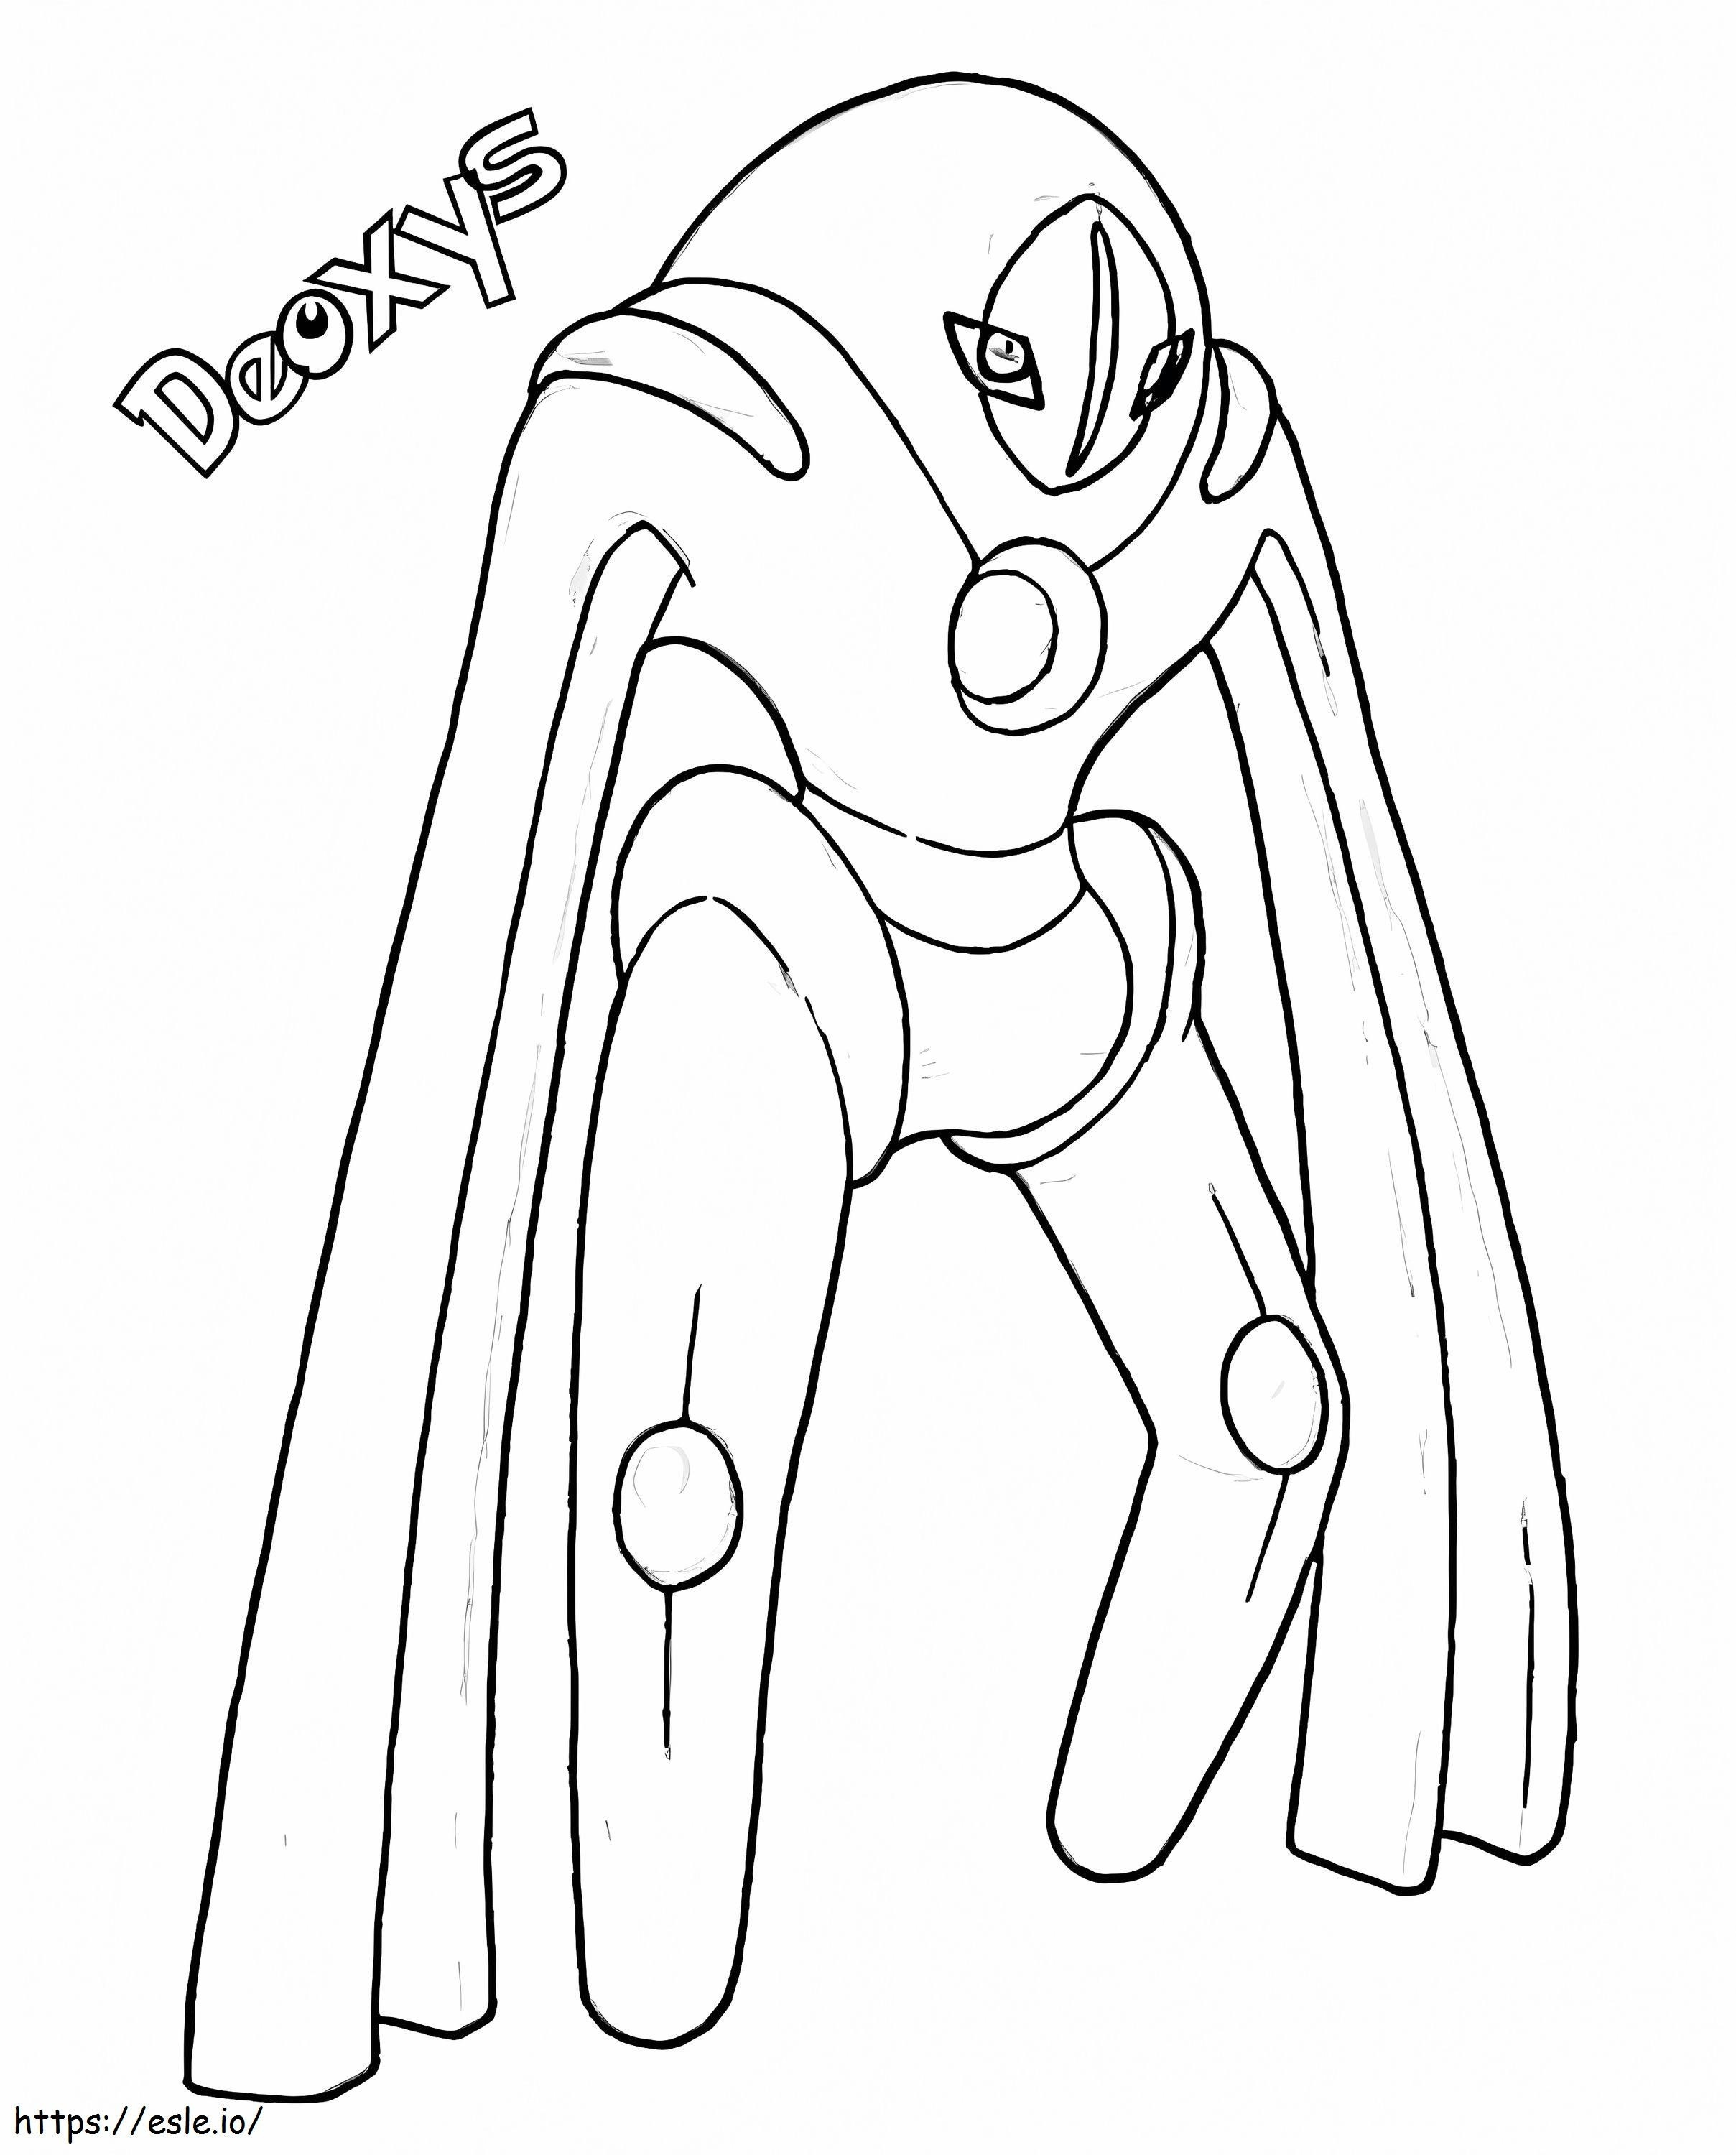 Deoxys Defense Form coloring page